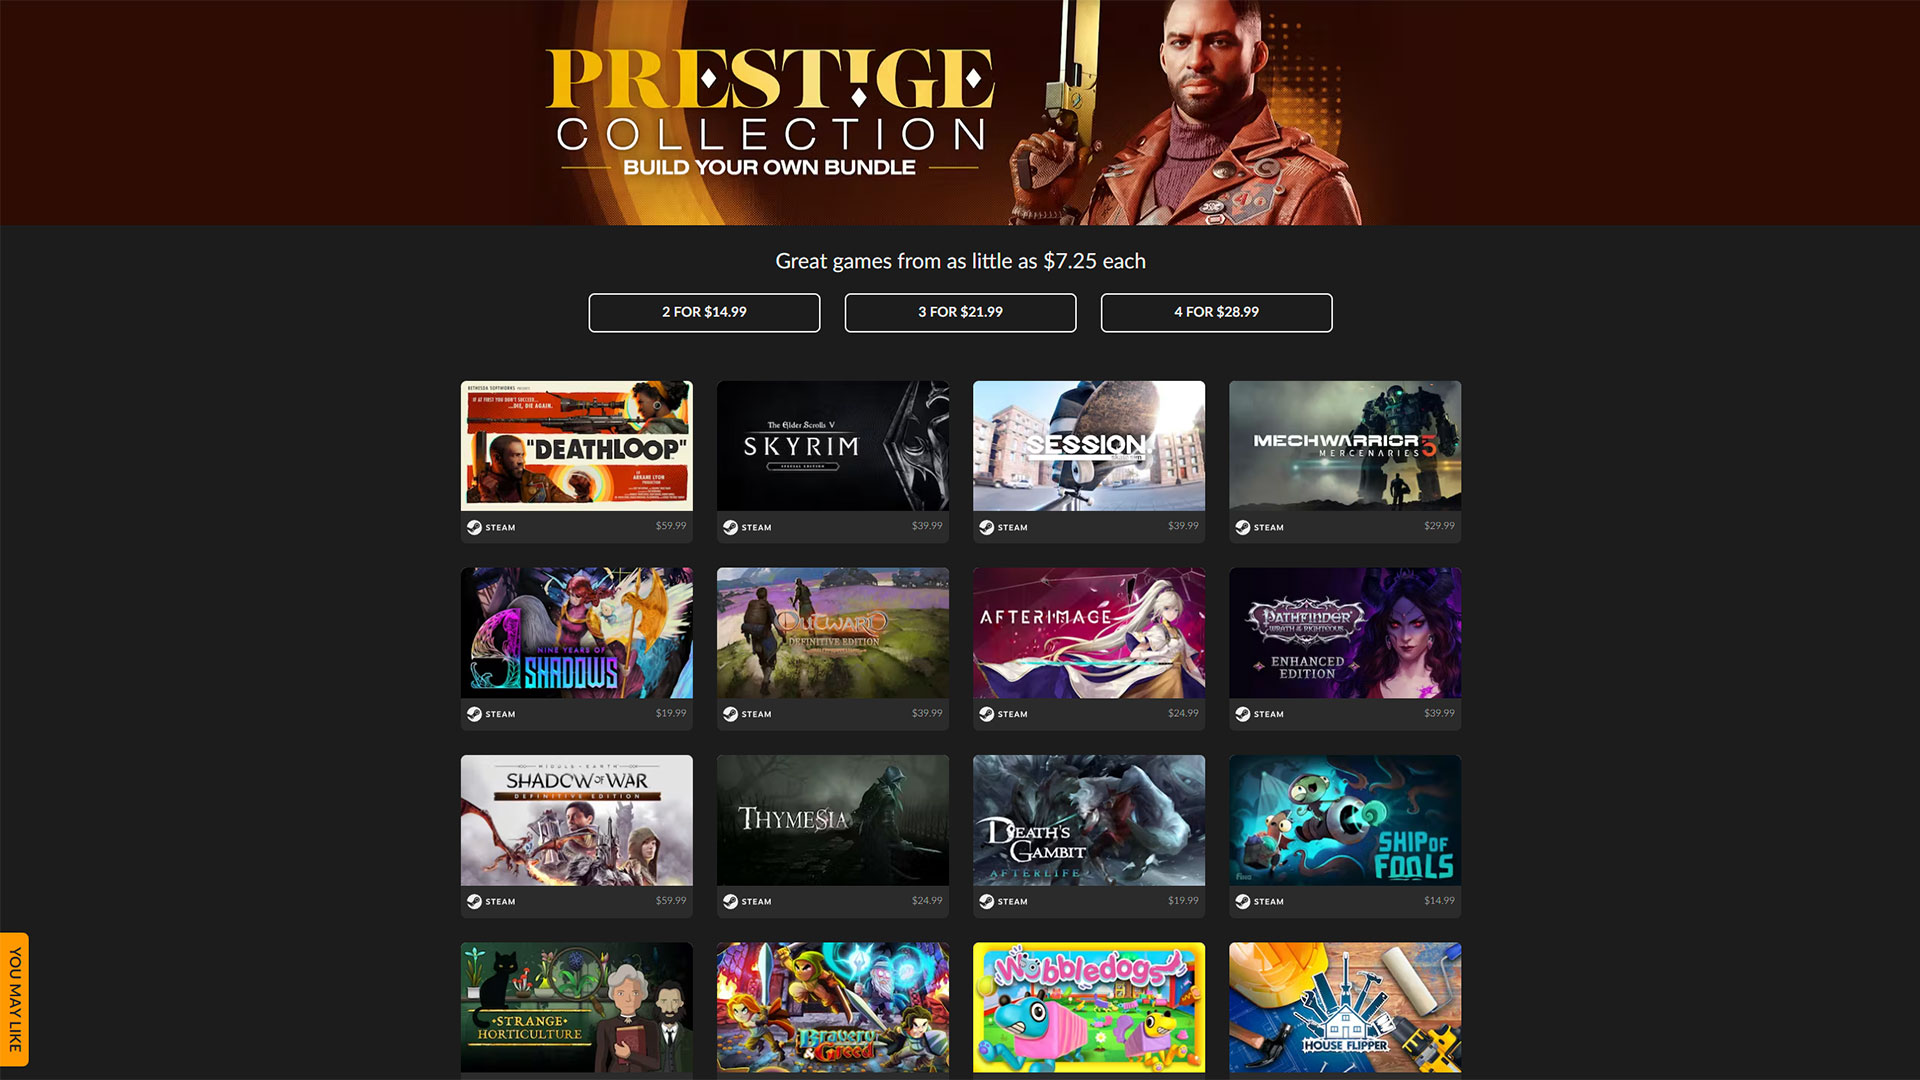 Fanatical's Prestige Collection allows you to build your own bundle of games